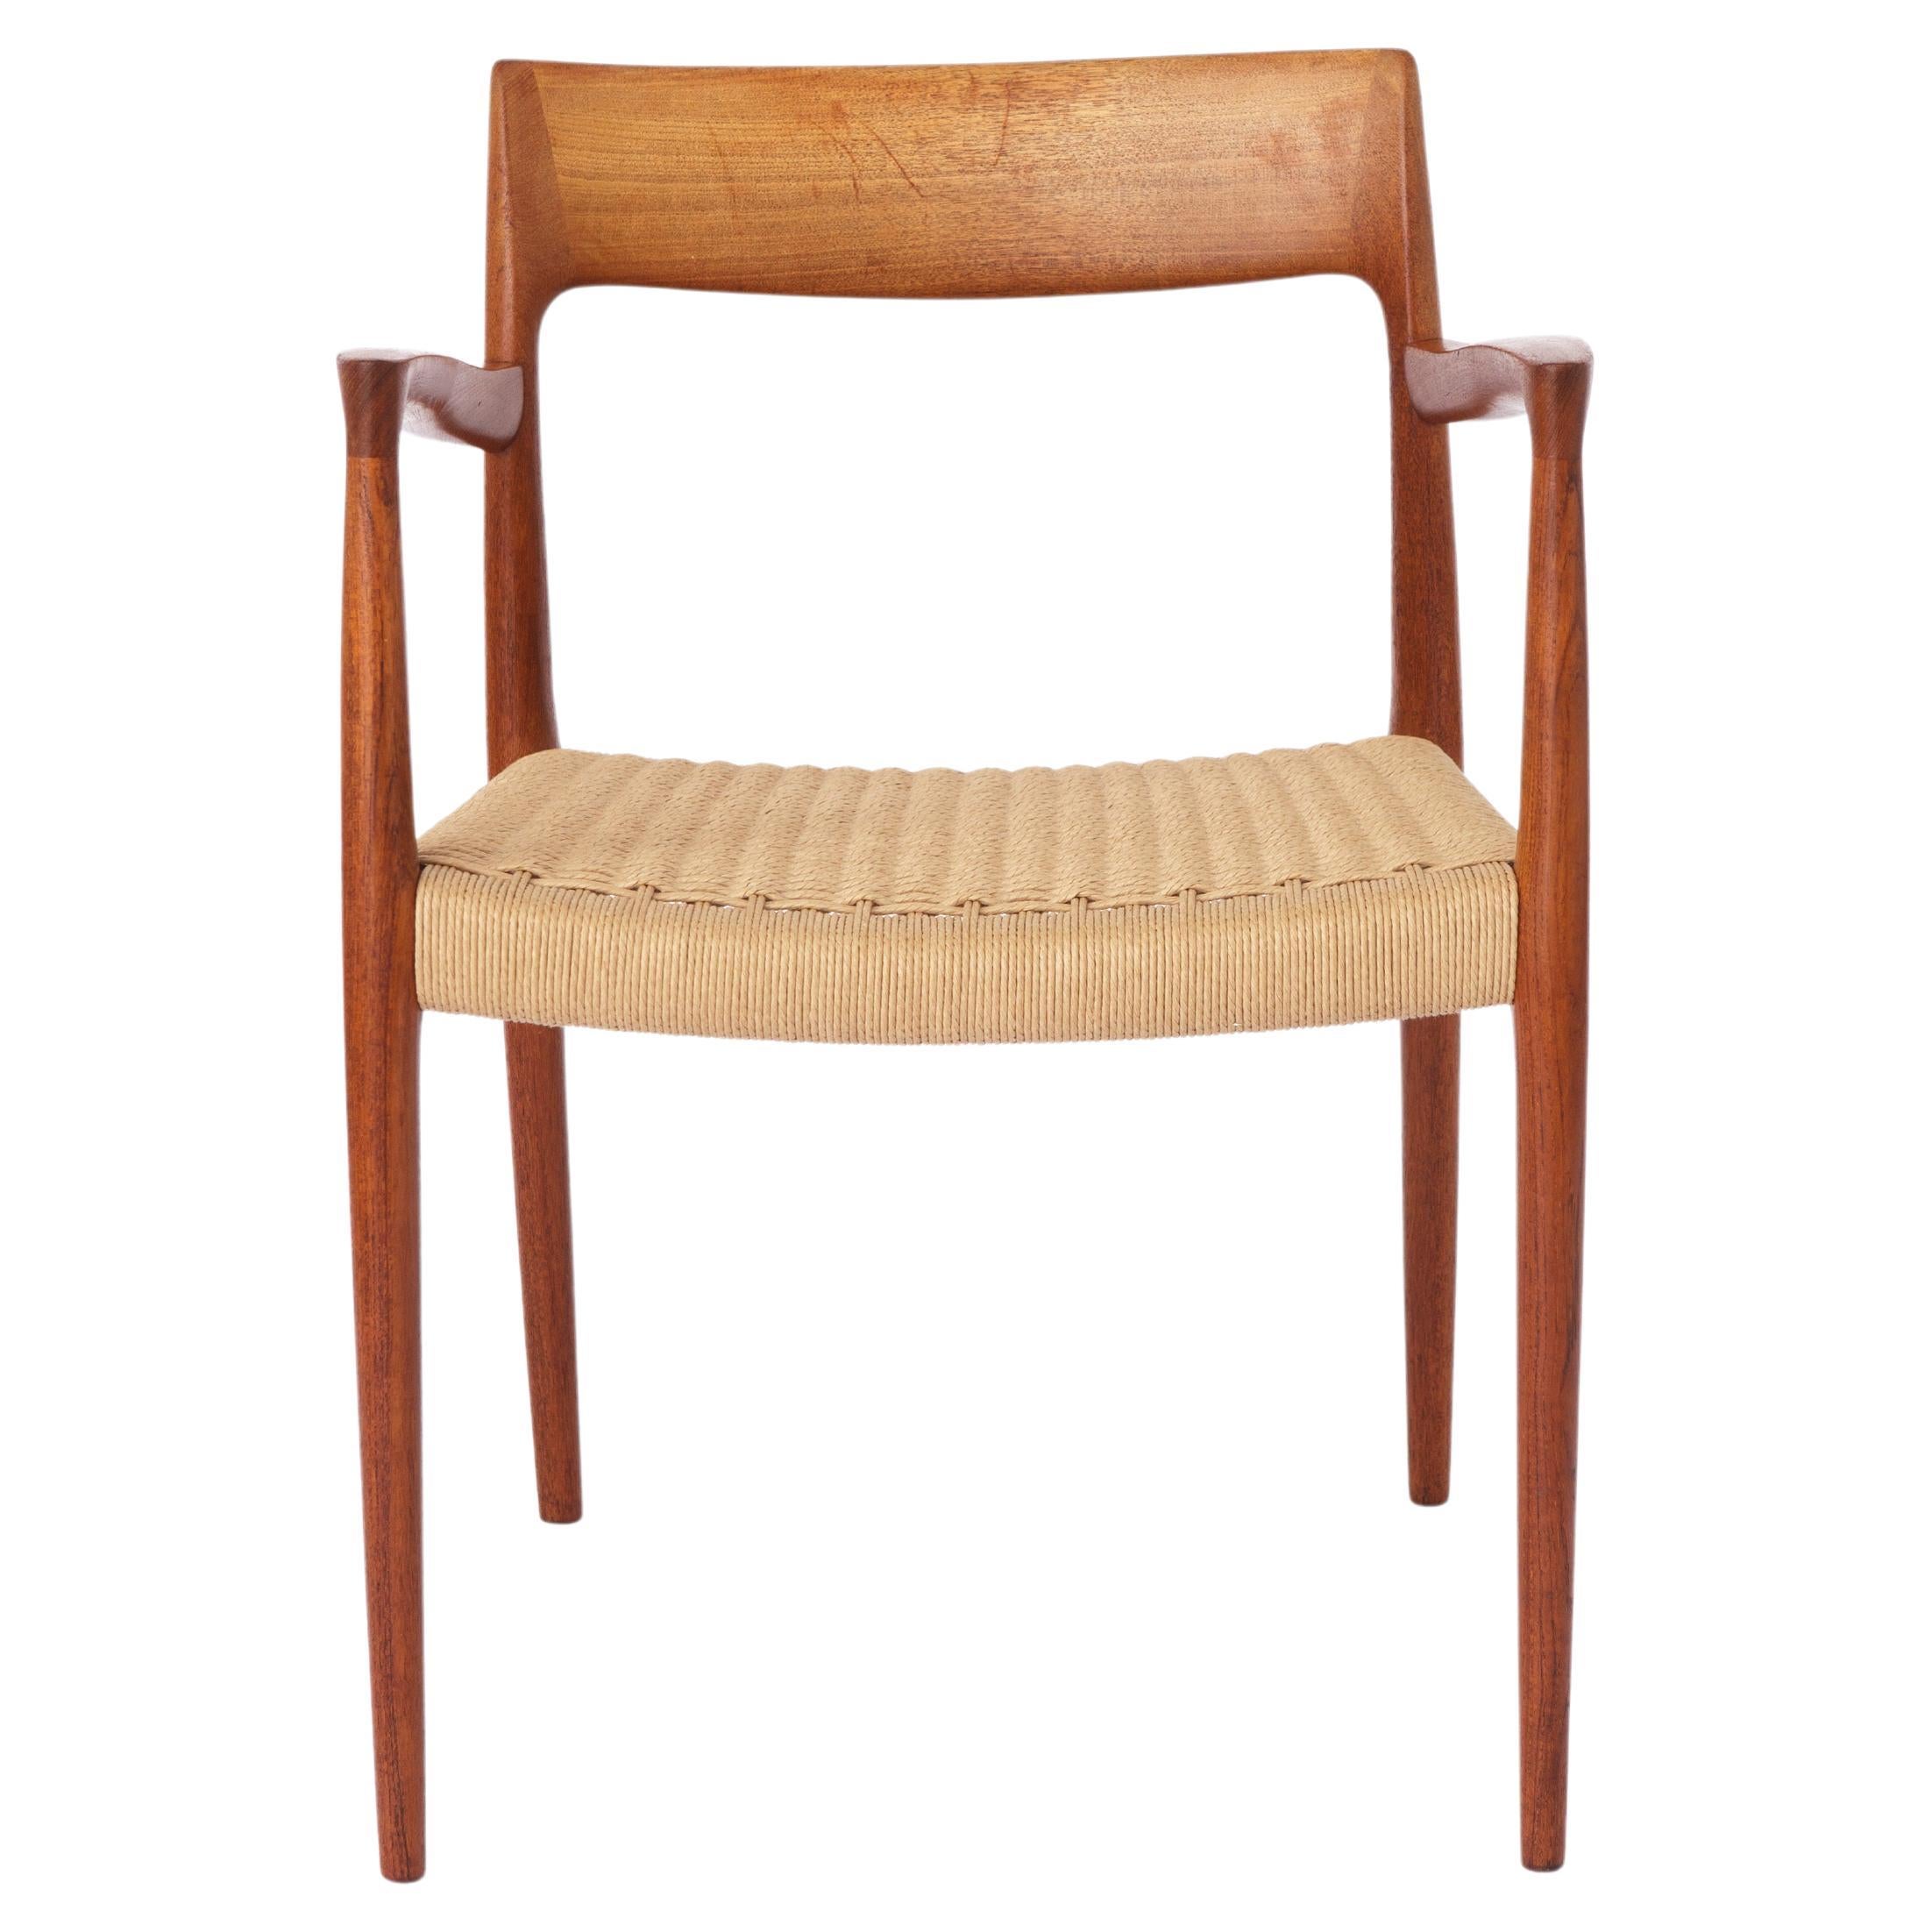 Niels Moller armchair, model 57, 1950s Vintage, paper cord seat, dining chair For Sale